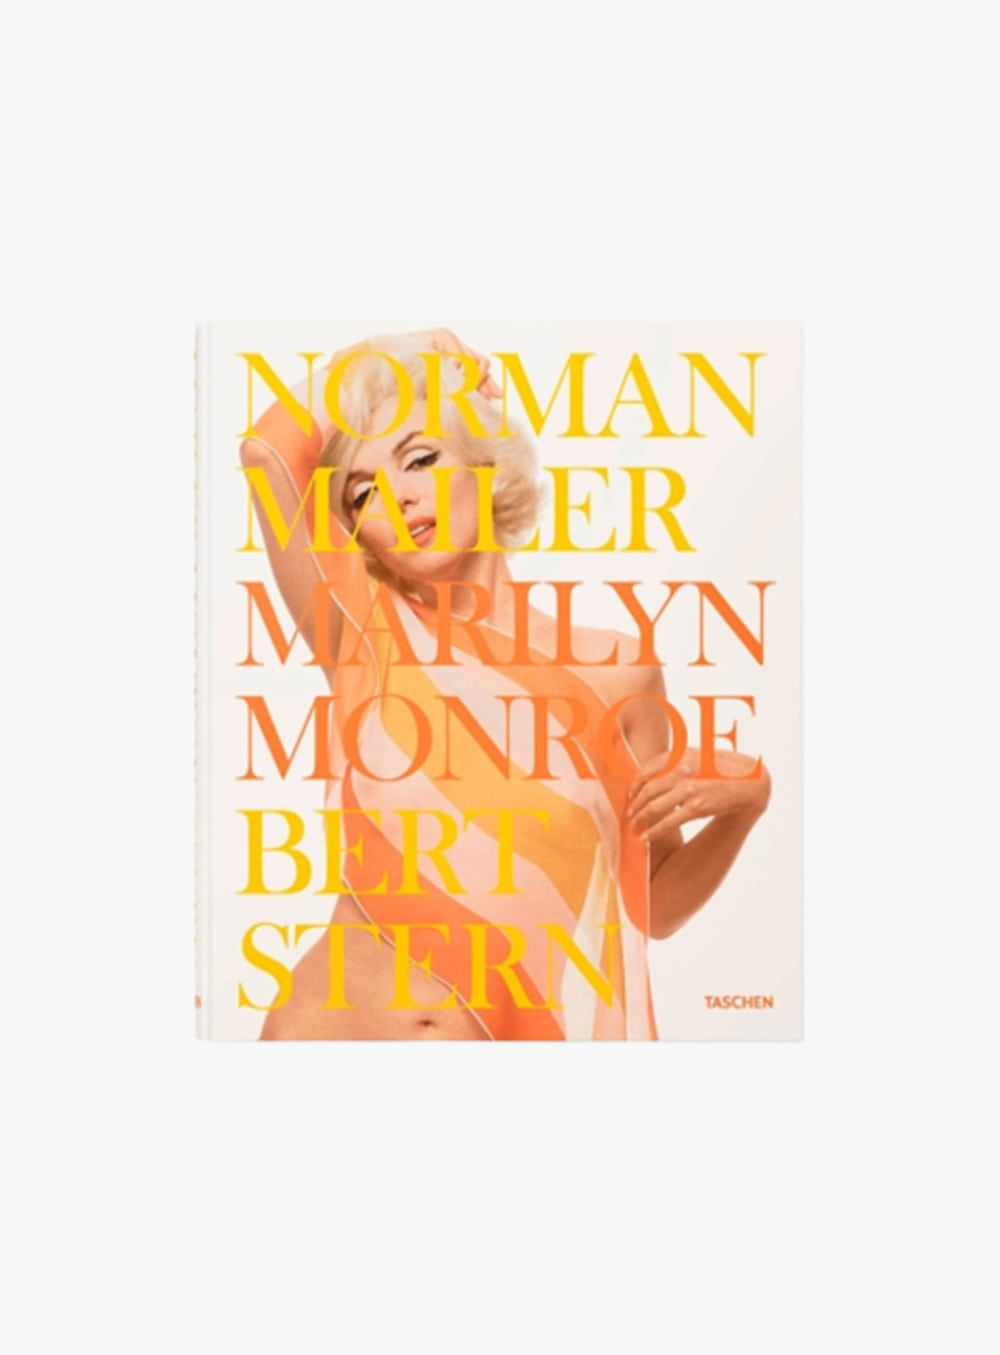 NEW MAGS - New mags marilyn monroe - norman mailer &amp; bert stern